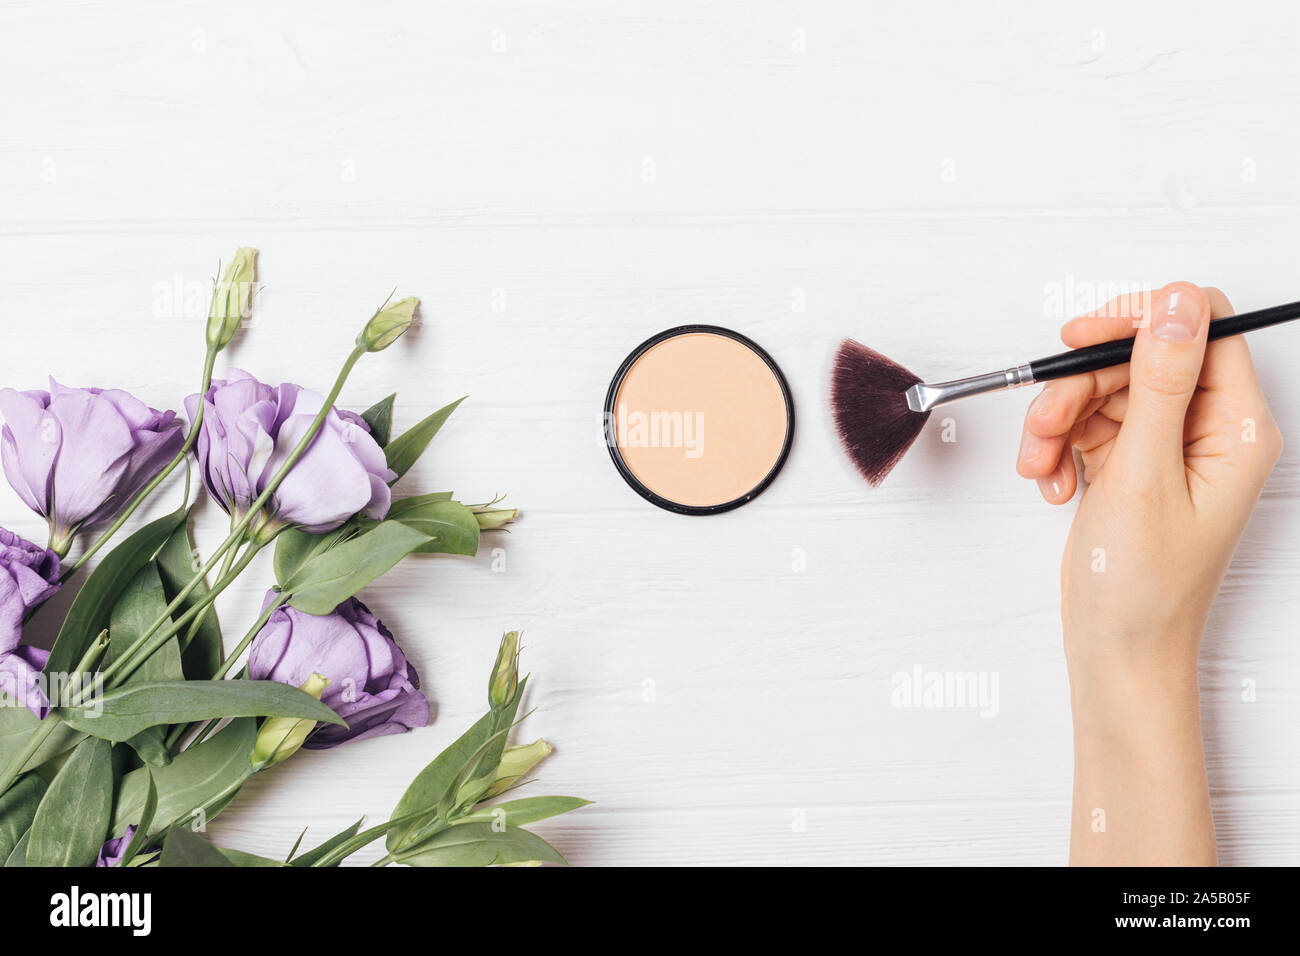 Female hand holding makeup brush using pressed powder on white background with purple lisianthus flowers, flat lay composition. Stock Photo